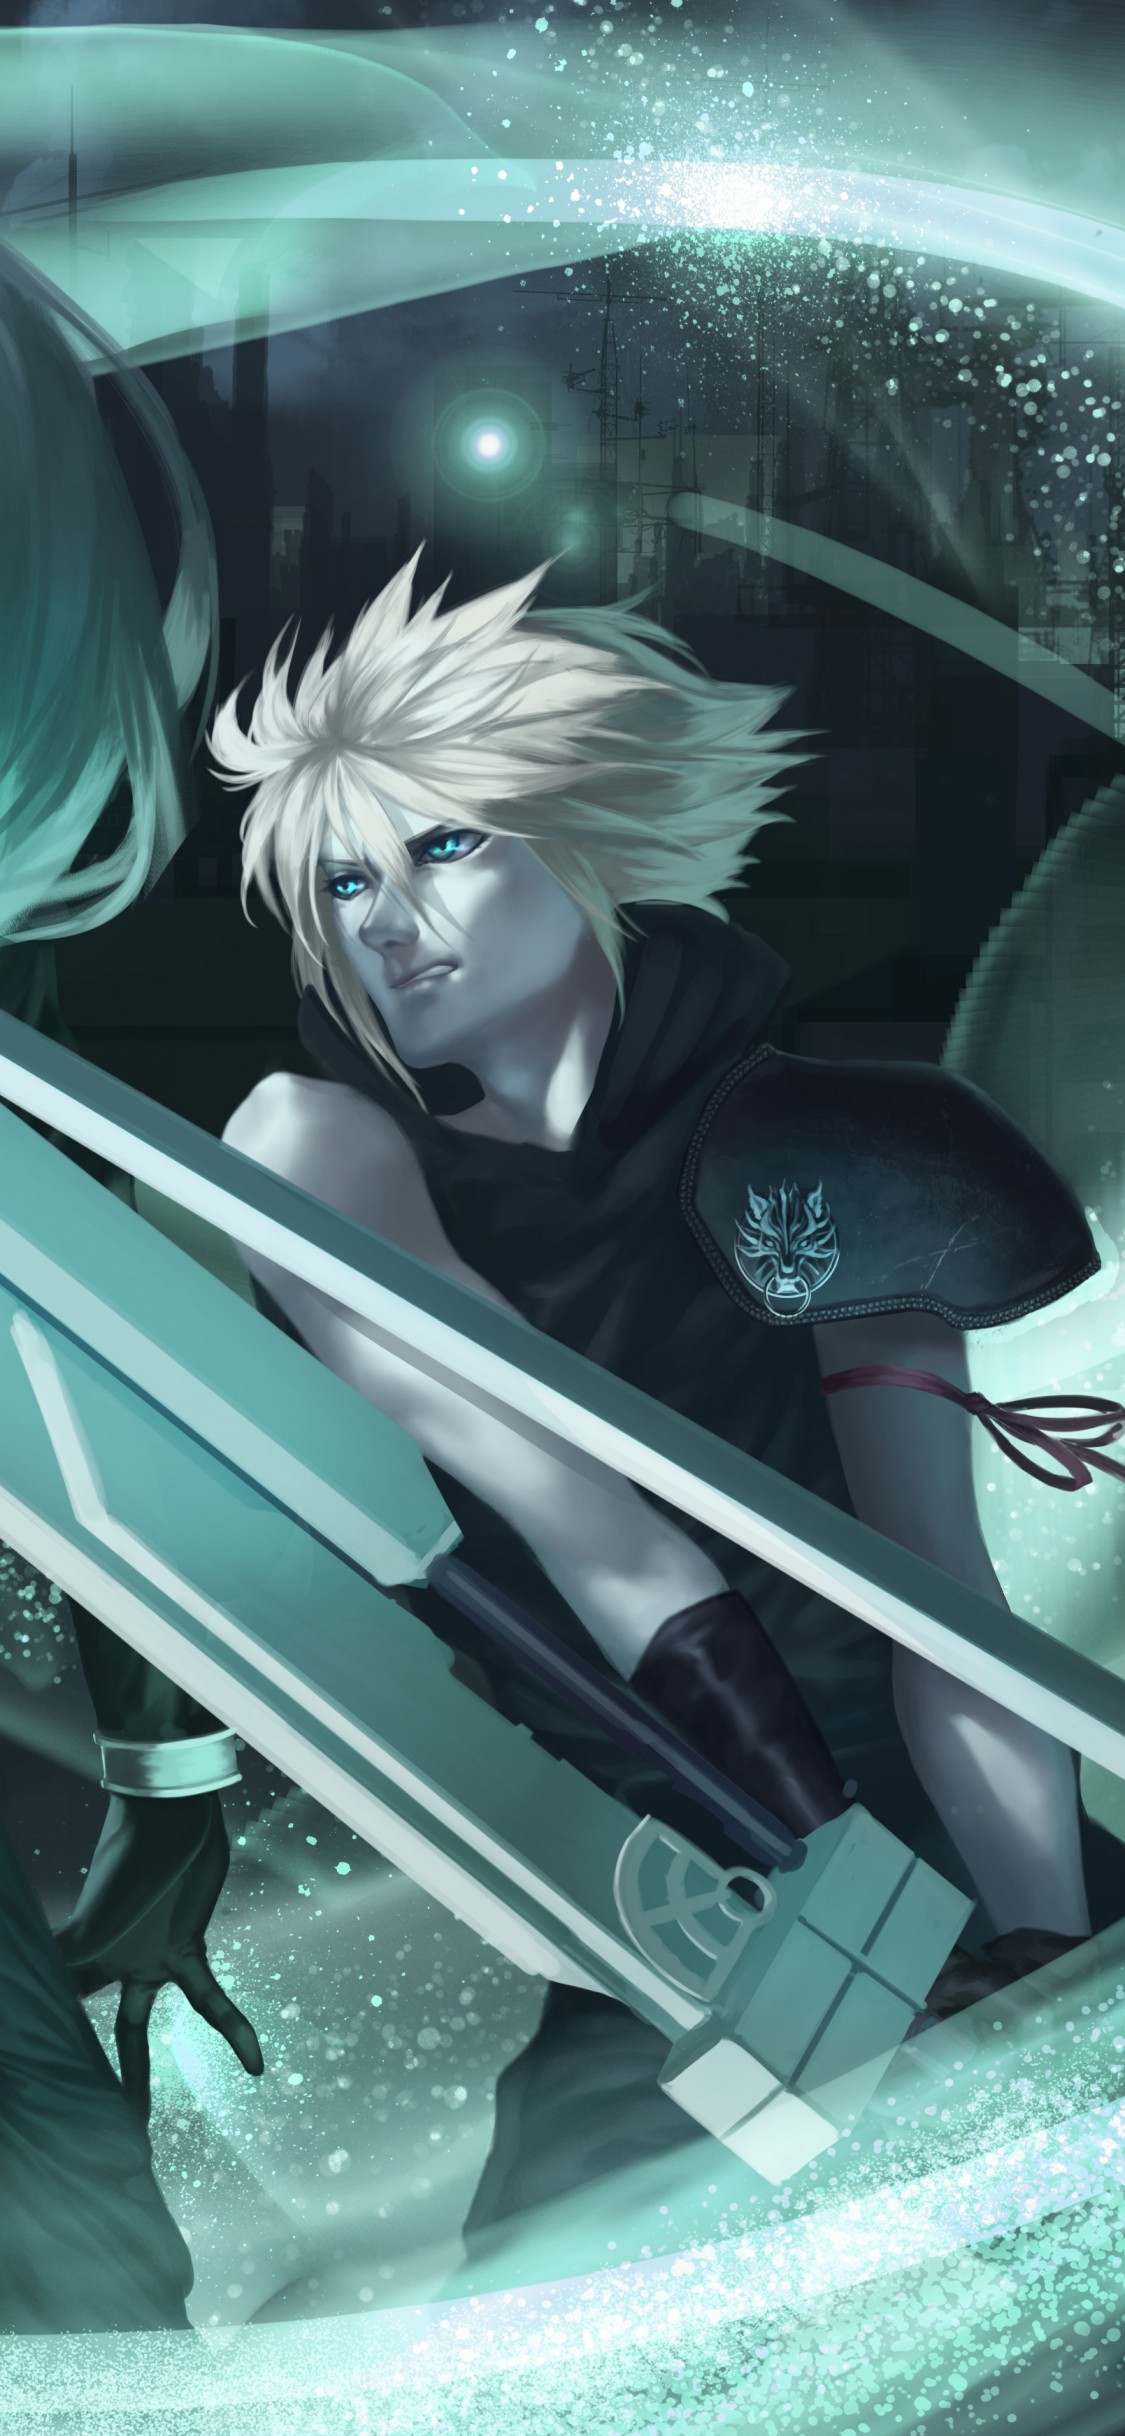 Download Cloud Strife Wallpaper, Cloud Strife Kingdom - Cloud Strife Wallpaper Iphone , HD Wallpaper & Backgrounds